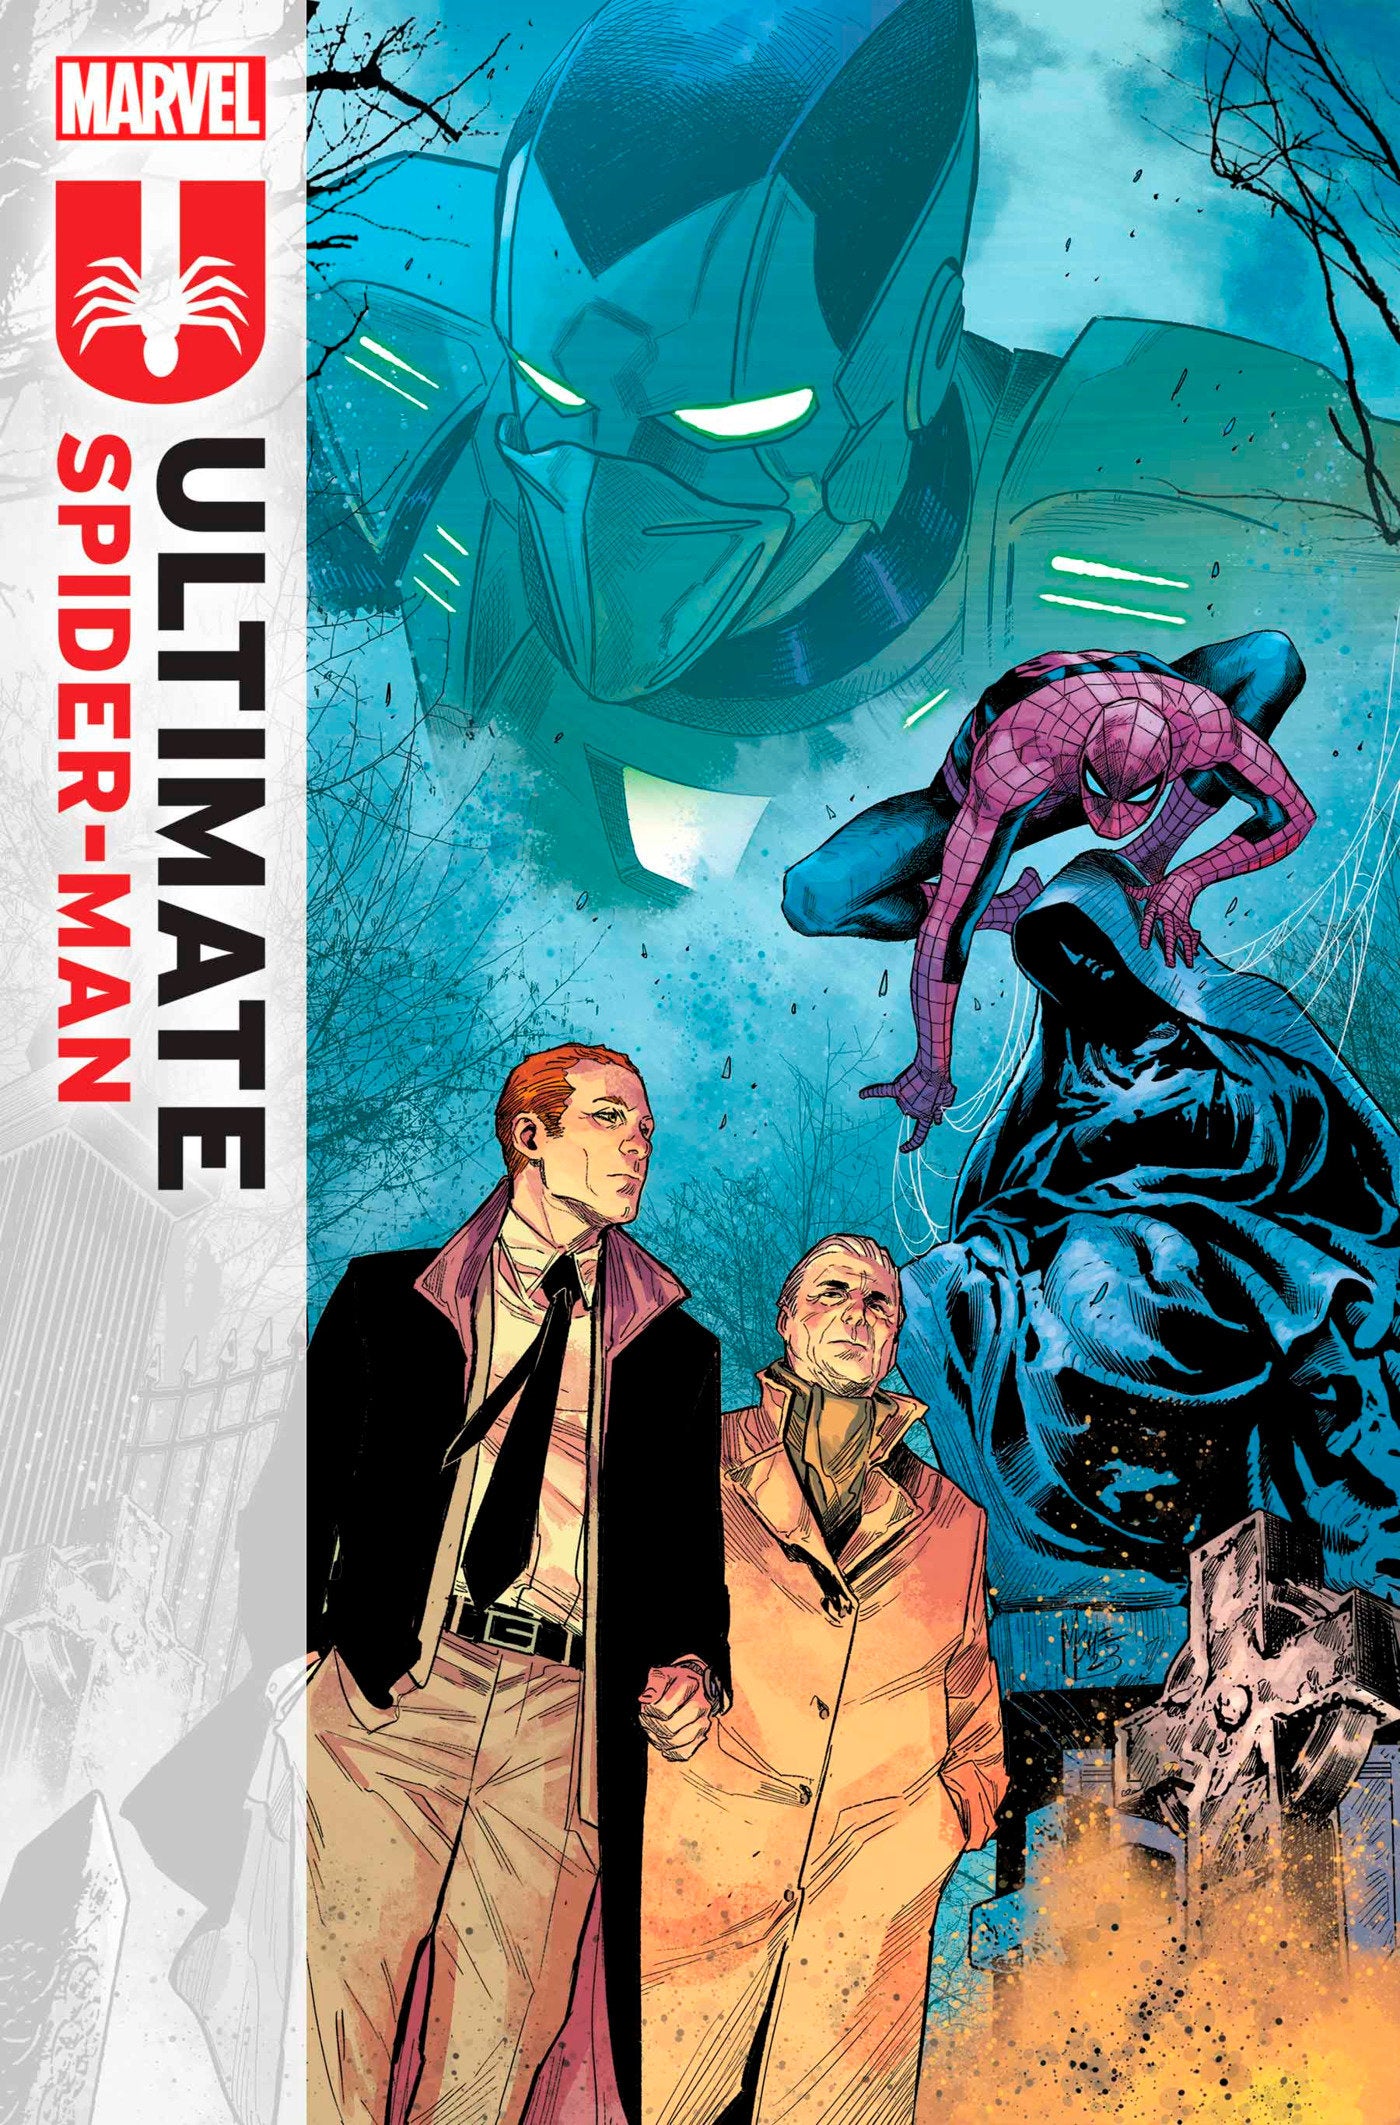 ULTIMATE SPIDER-MAN #5 - Release Date:  5/29/24